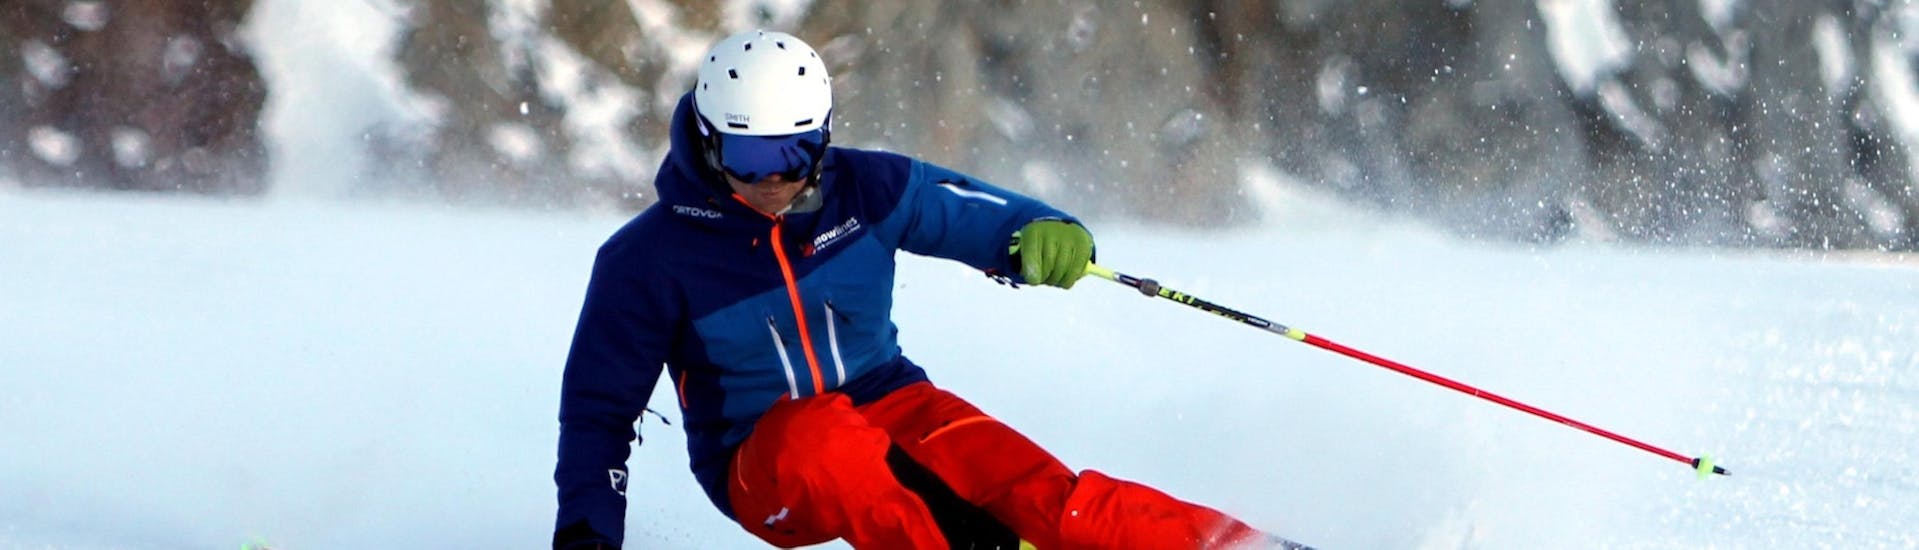 Private Ski Lessons for Adults of All Levels with Ski School SNOWLINES Sölden - Hero image